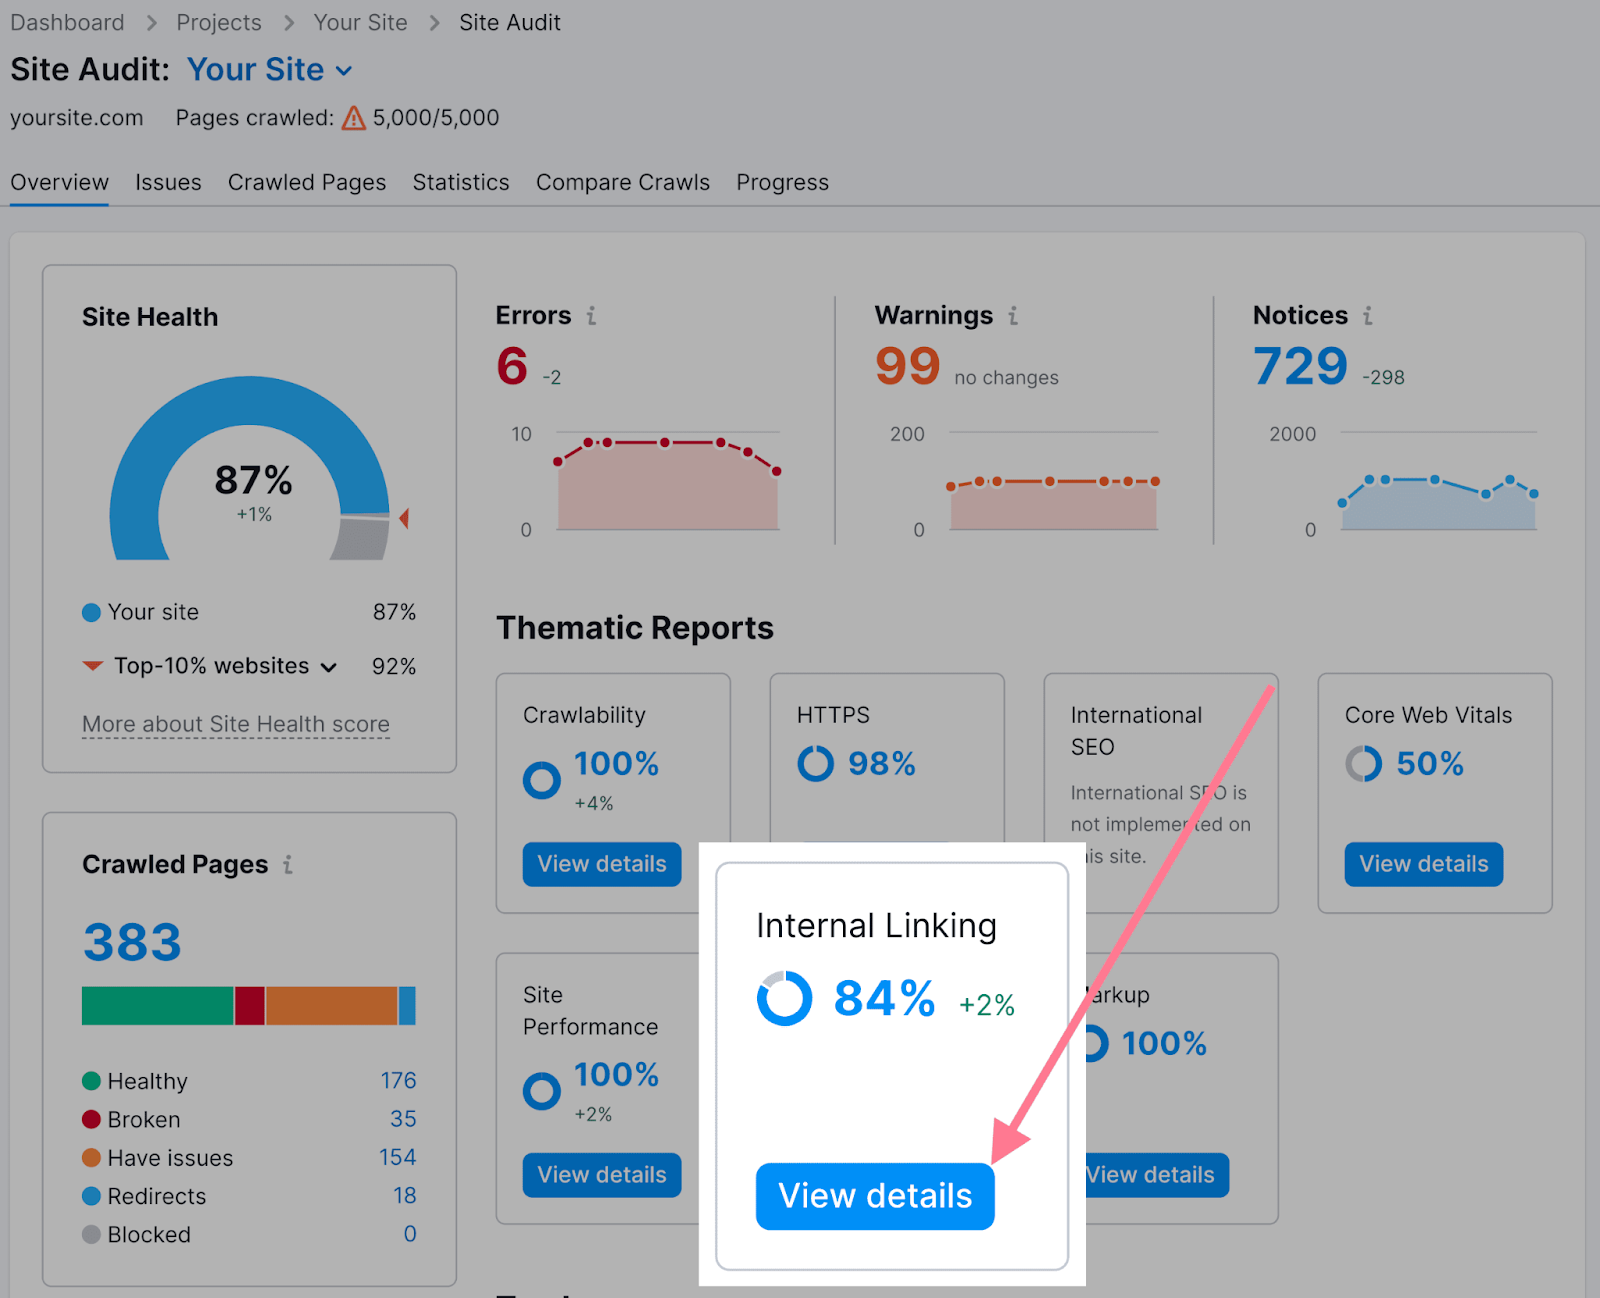 “Internal Linking" widget highlighted successful  the Site Audit's overview dashboard